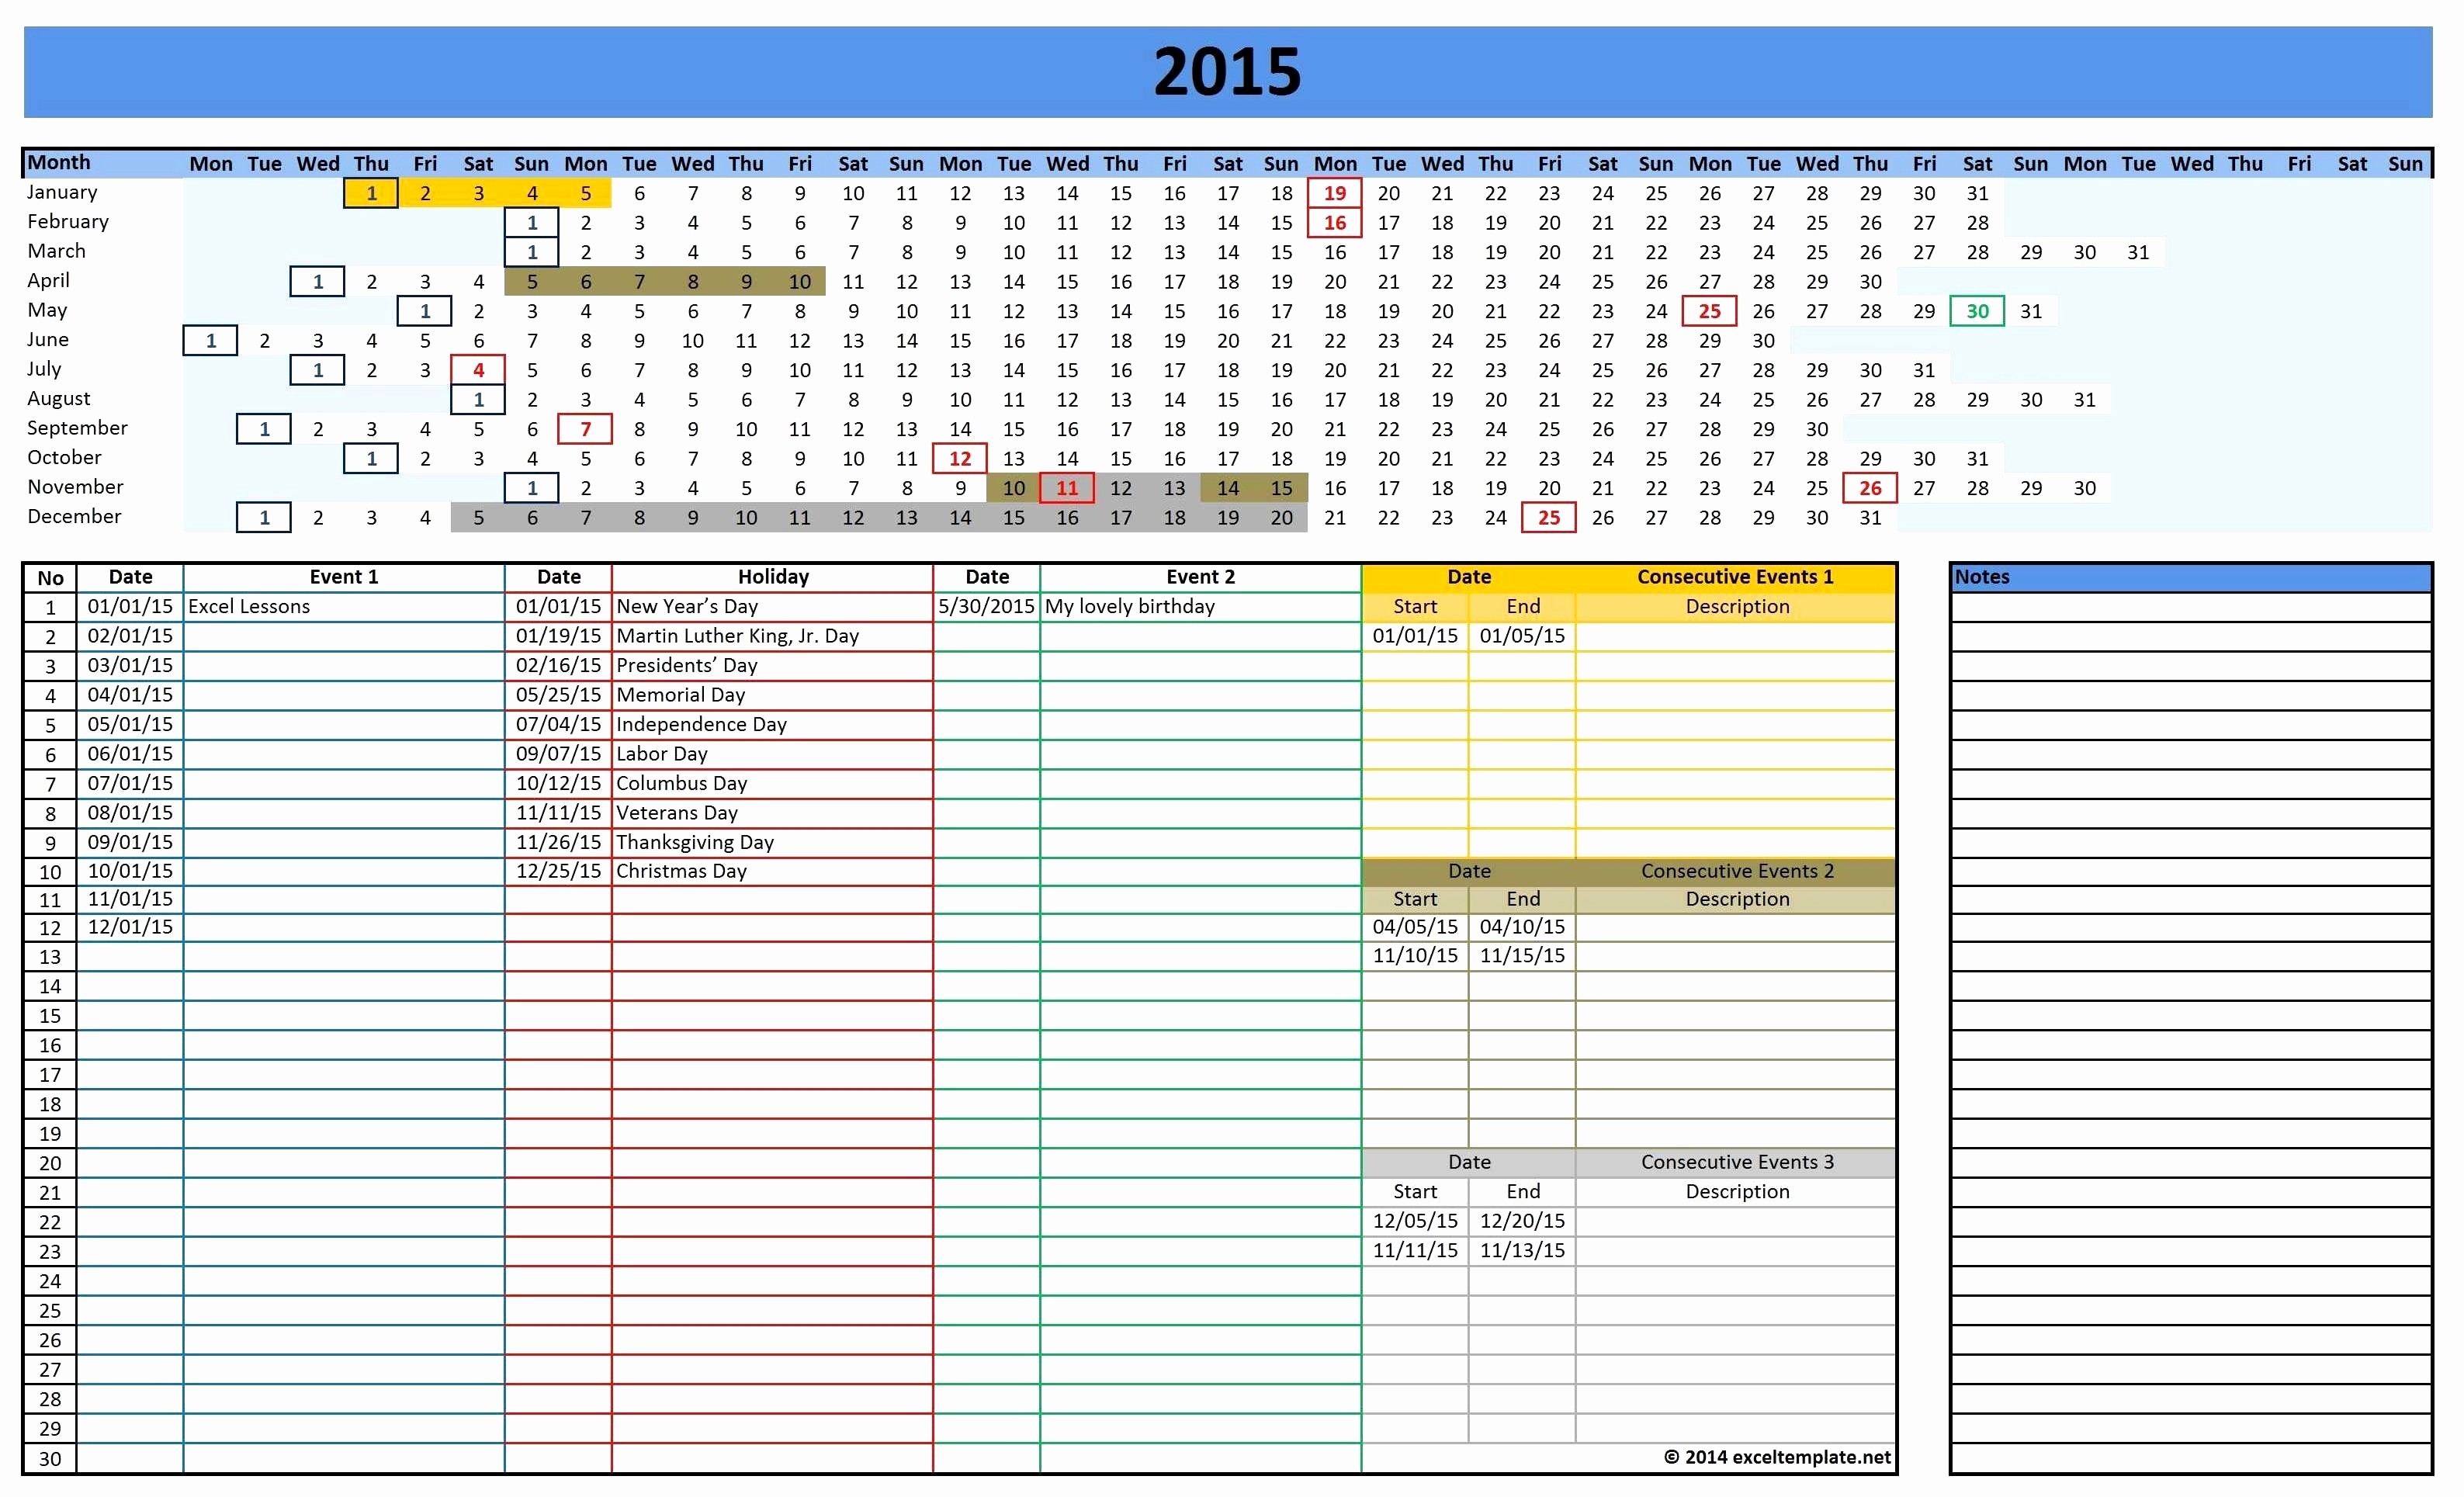 50 Inspirational Crossfit Excel Spreadsheet DOCUMENTS IDEAS Document